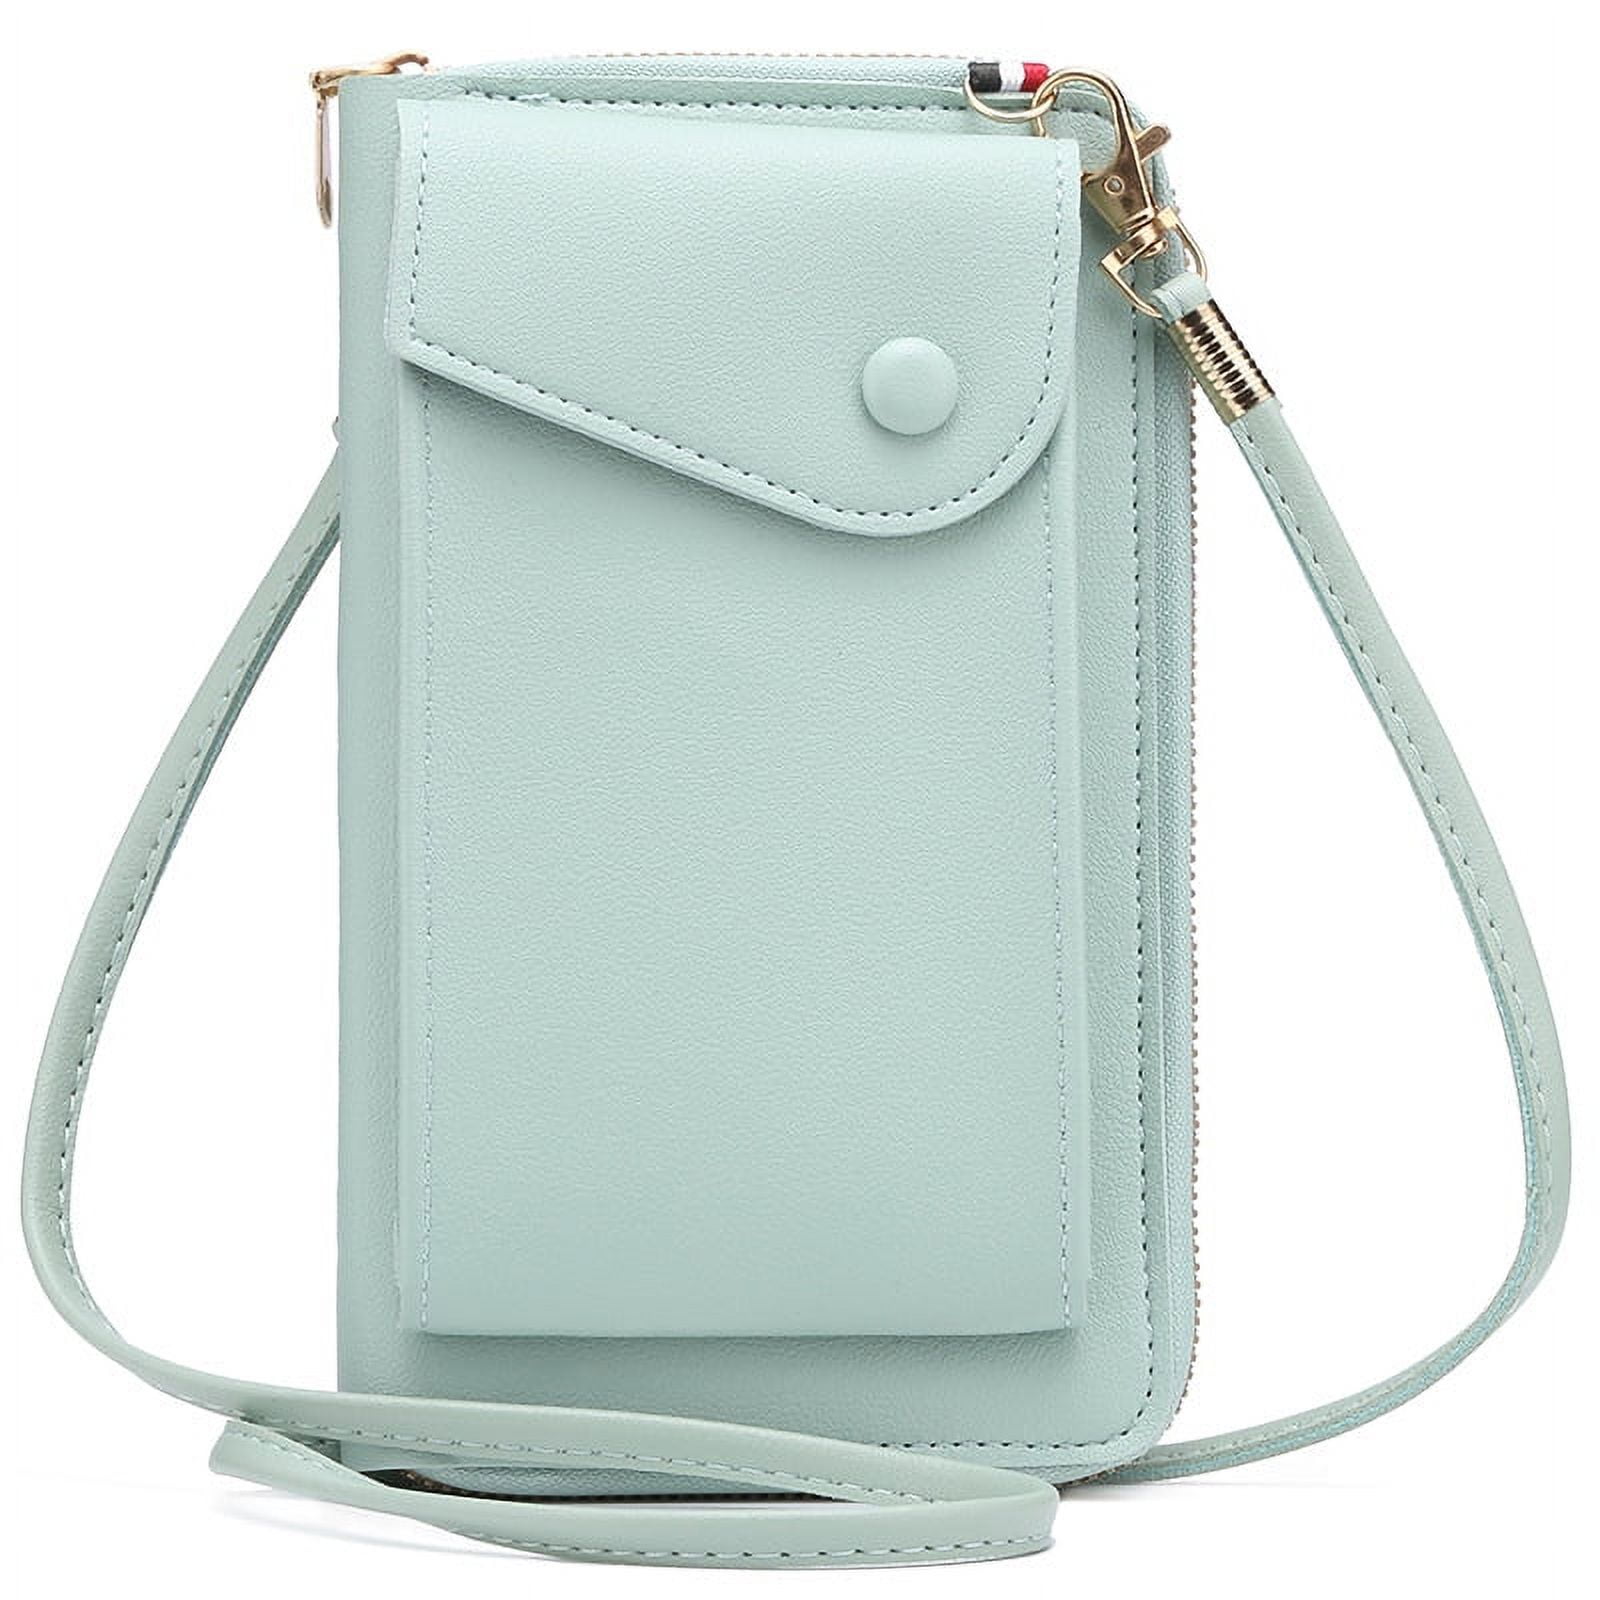 Small Canvas Cell Phone Purse Wallet, Leaf Pattern Roomy Casual Crossbody  Bag For Women Girls, Mini Lightweight Shoulder Bag With Adjustable Shoulder  Strap - Walmart.com